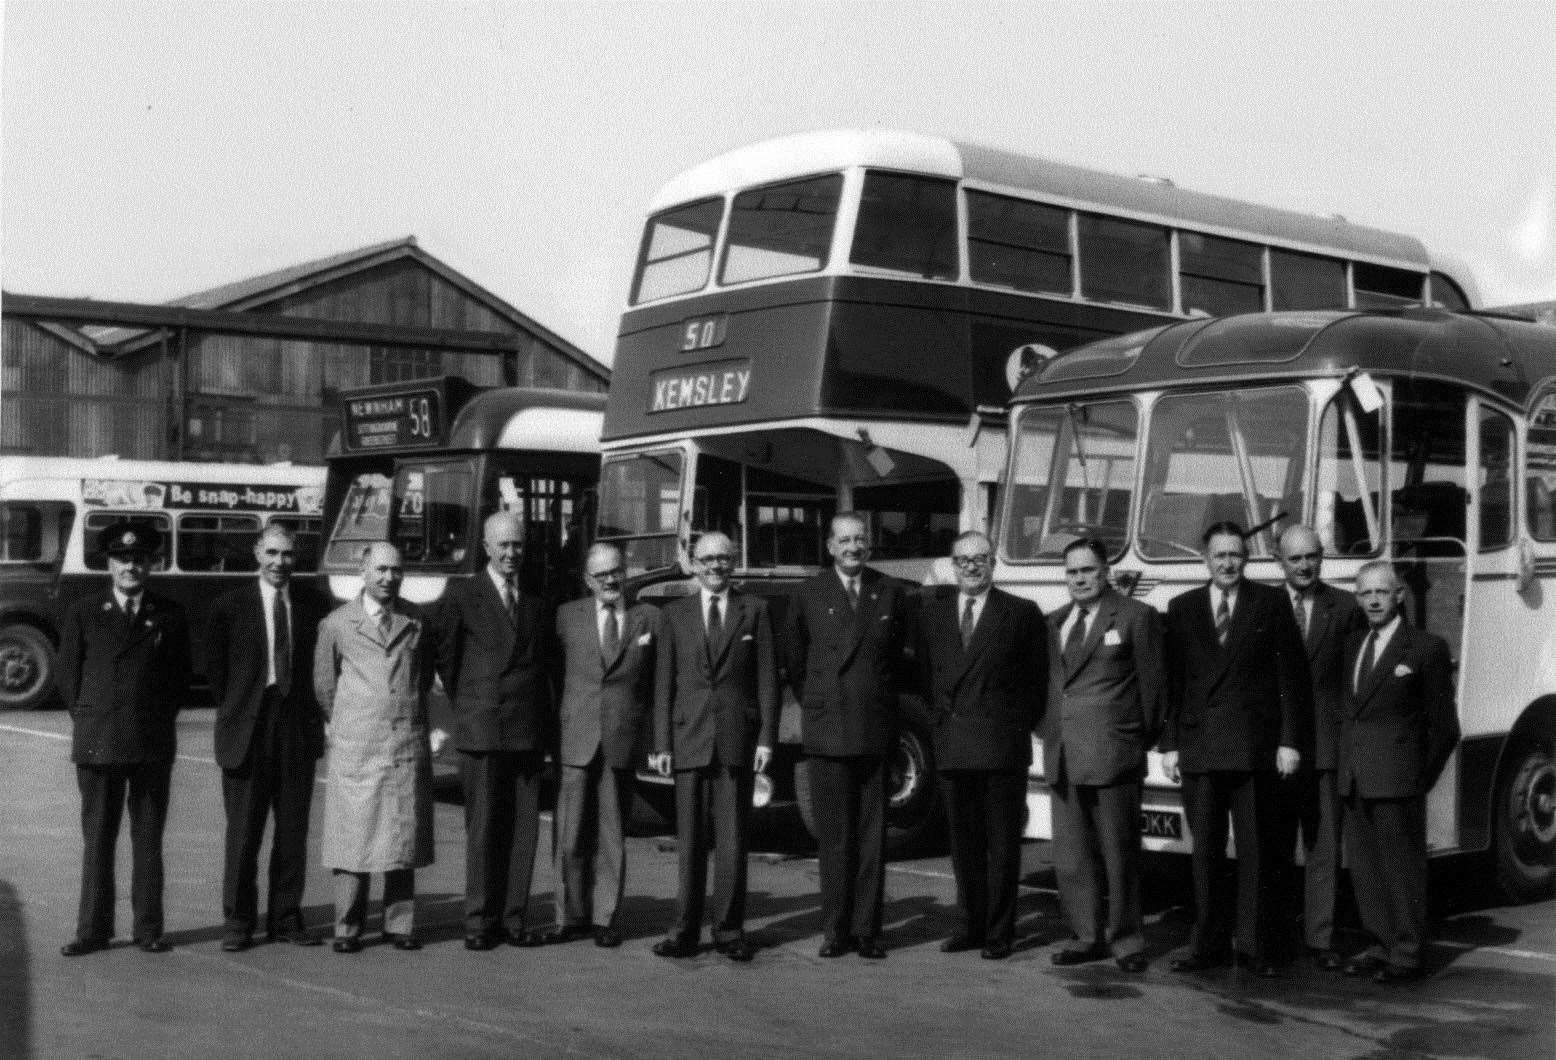 Maidstone & District bus workers